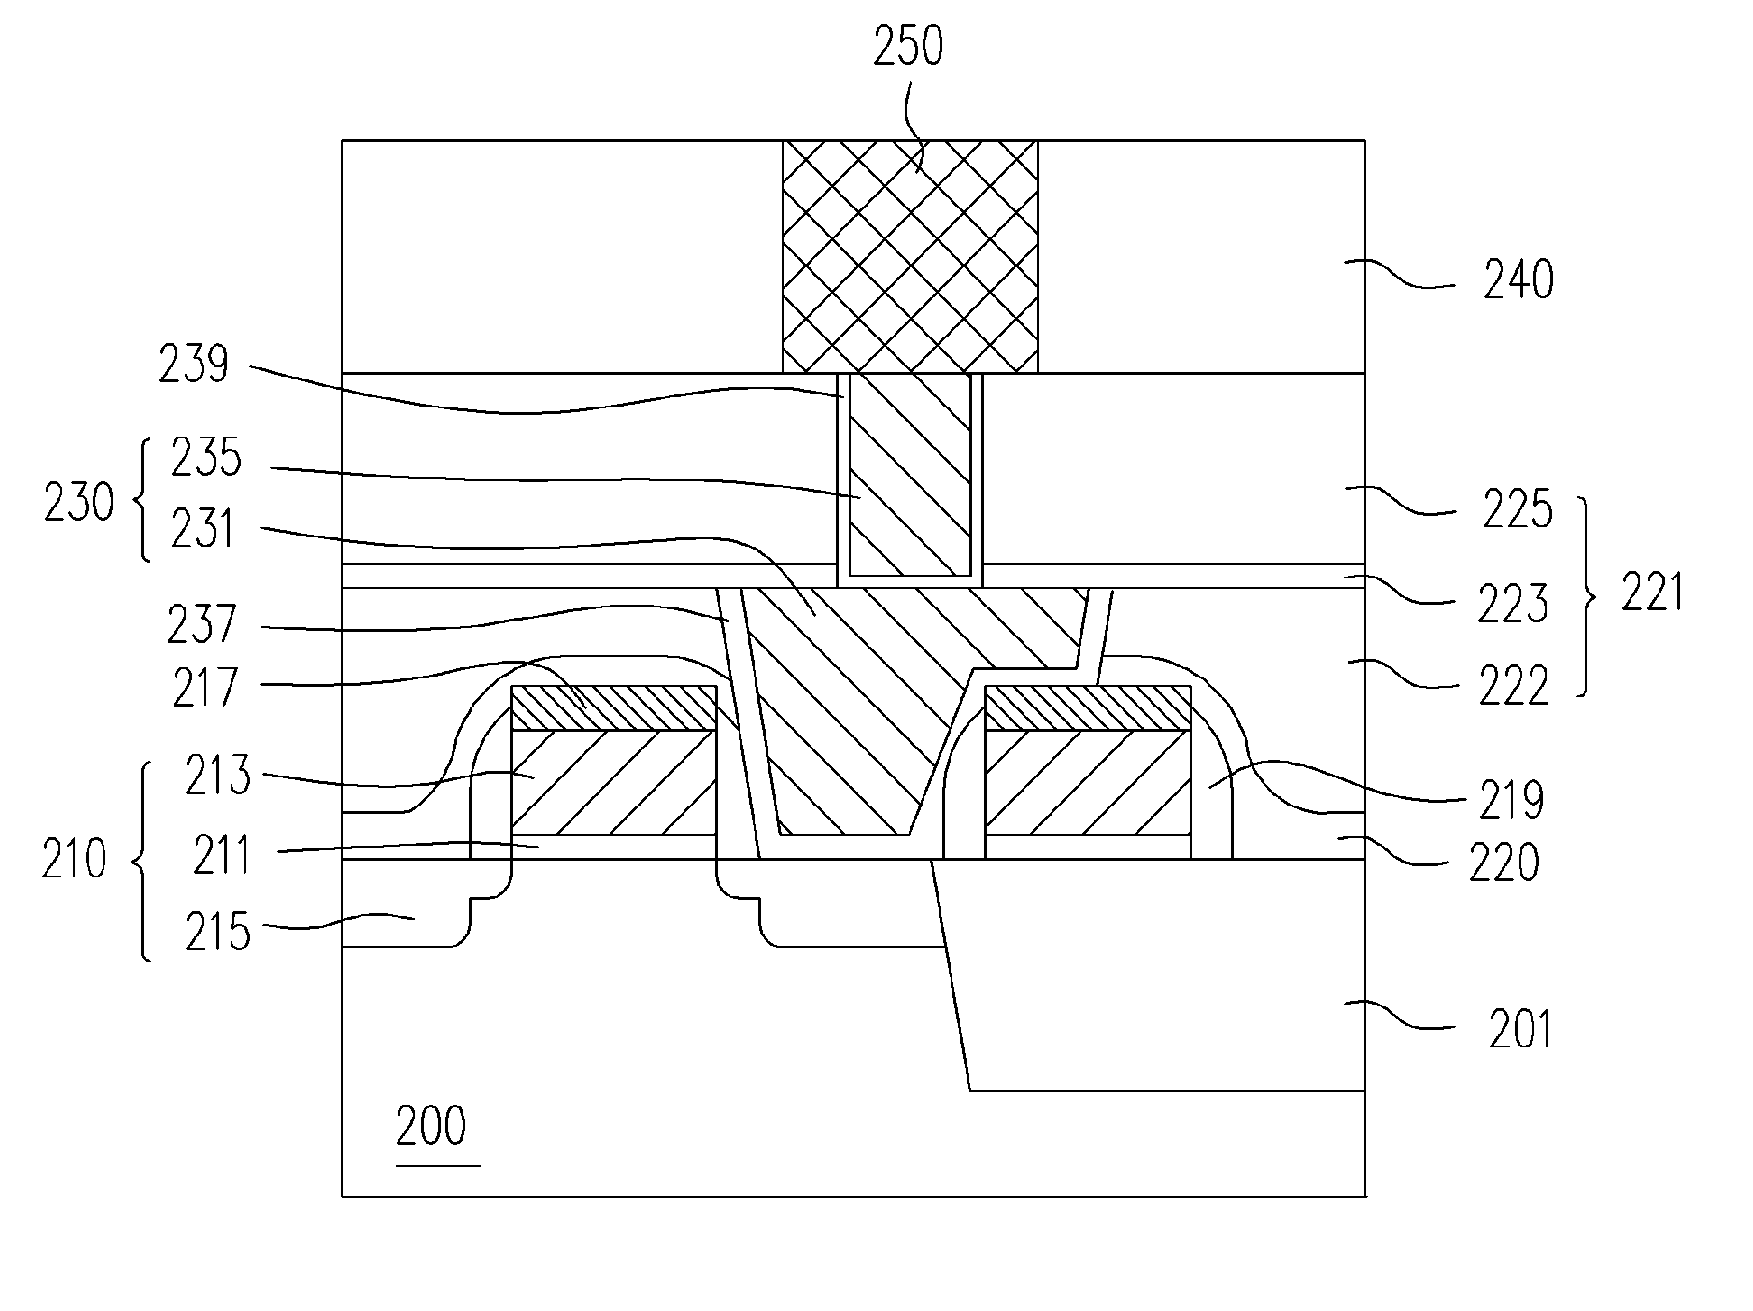 Interconnect structure and fabricating method thereof